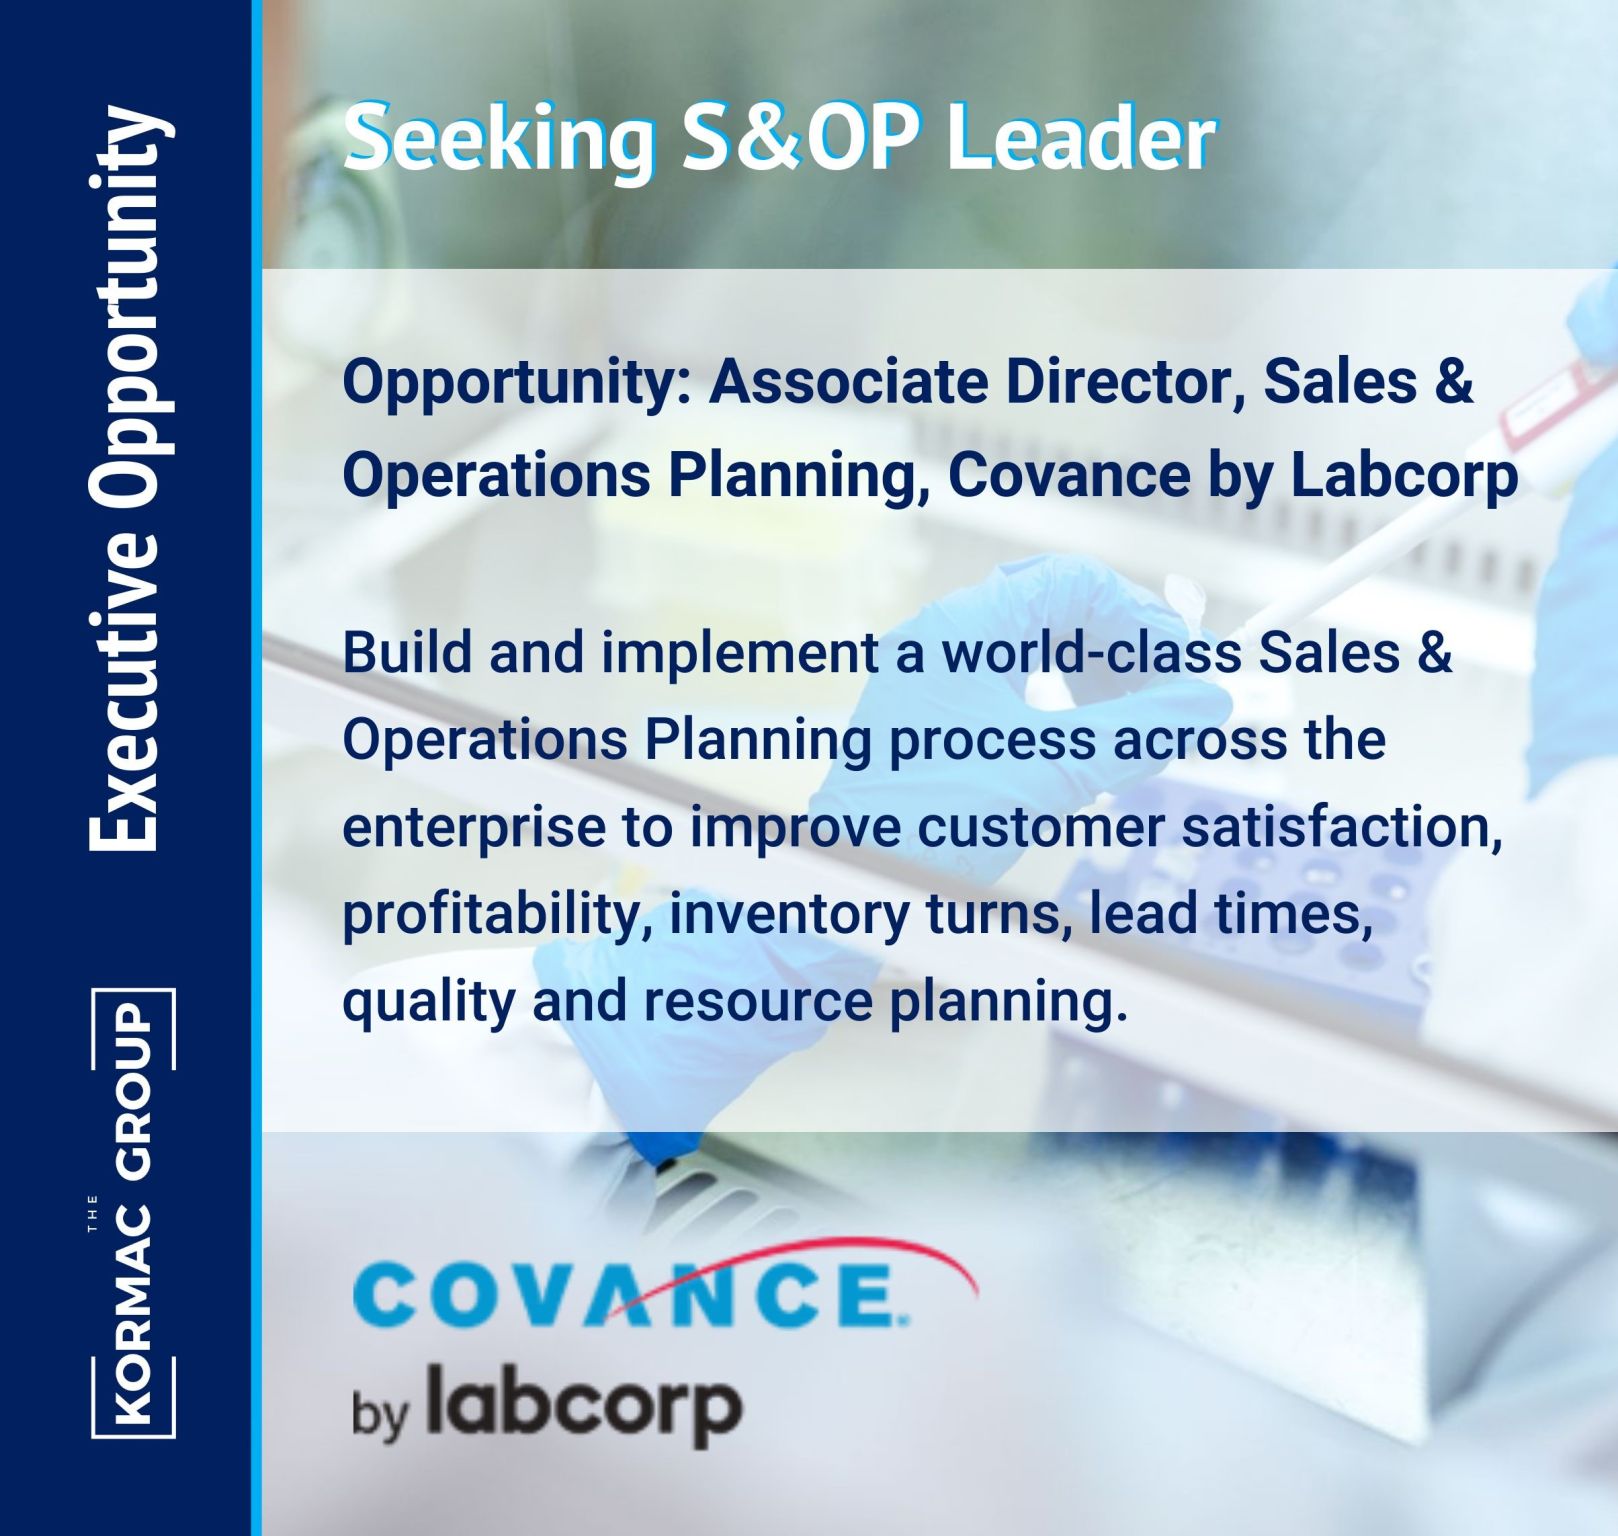 Executive Opportunity Seeking S&OP Leader Opportunity: Associate Director, Sales & Operations Planning, Covance by Labcorp Build and implement a world-class Sales & Operations Planning process across the enterprise to improve customer satisfaction, profitability, inventory turns, lead times, quality and resource planning. [Covance by Labcorp logo appears on the bottom of the image]